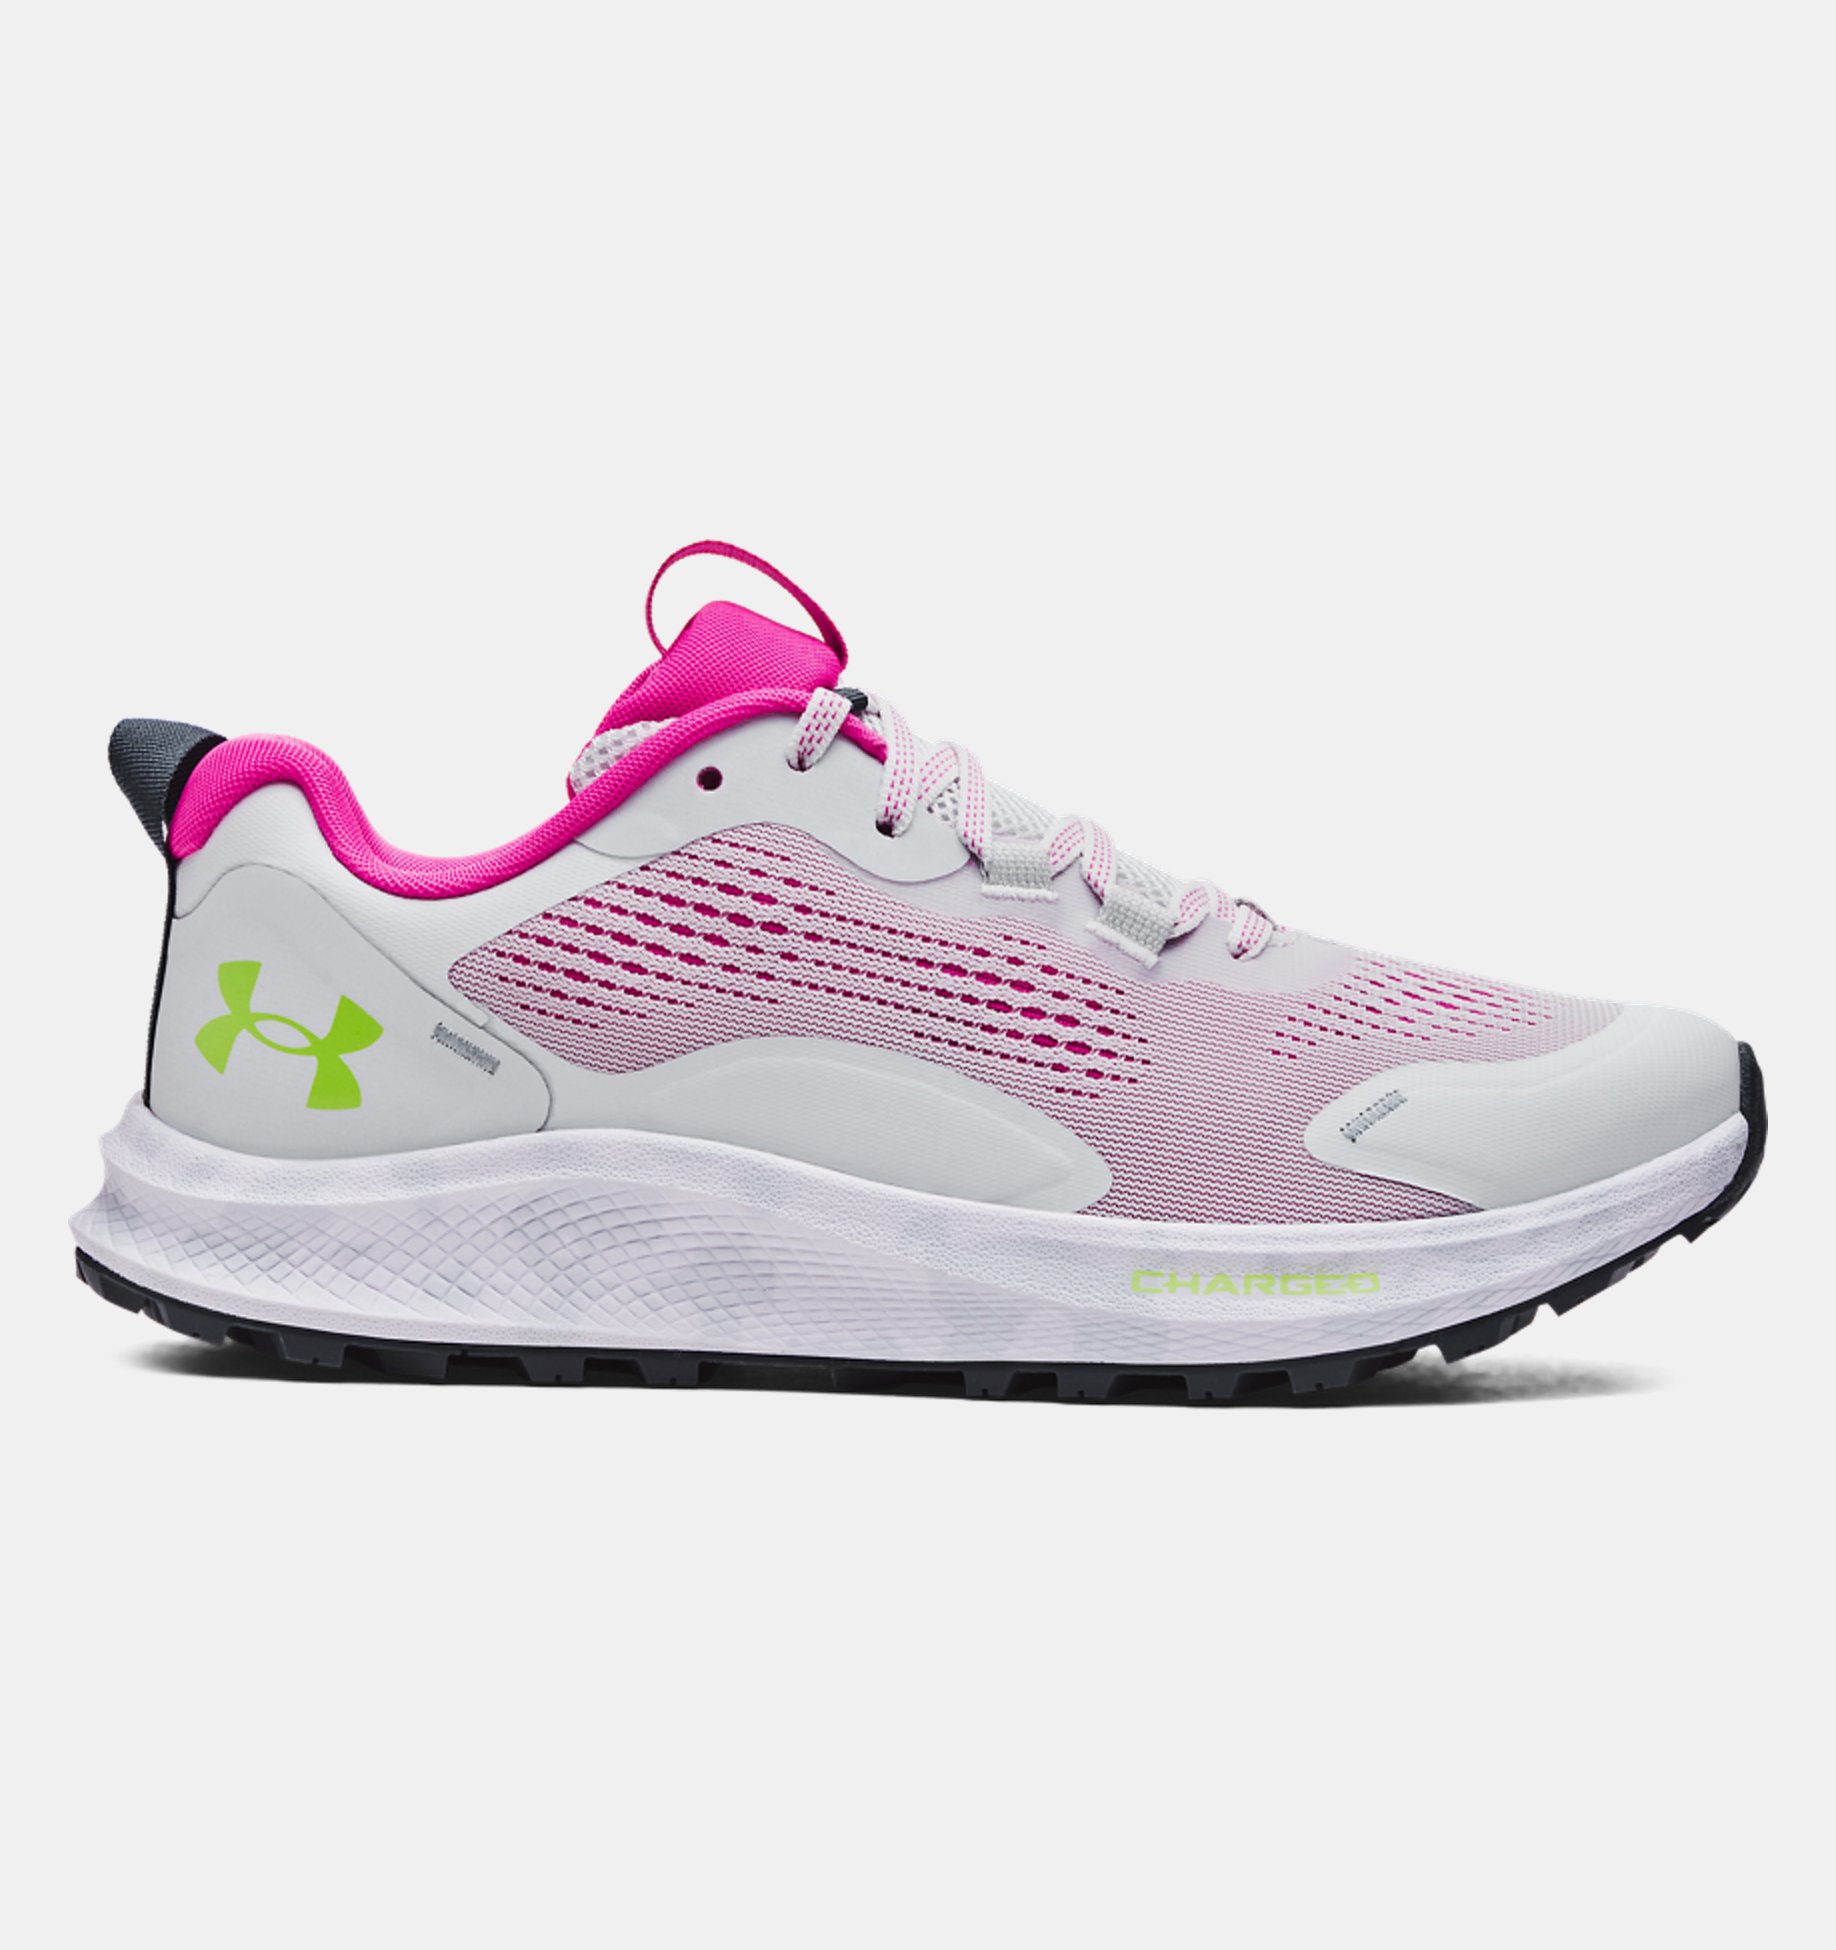 Skyldfølelse indhente Ringlet Women's UA Charged Bandit Trail 2 Running Shoes | Under Armour